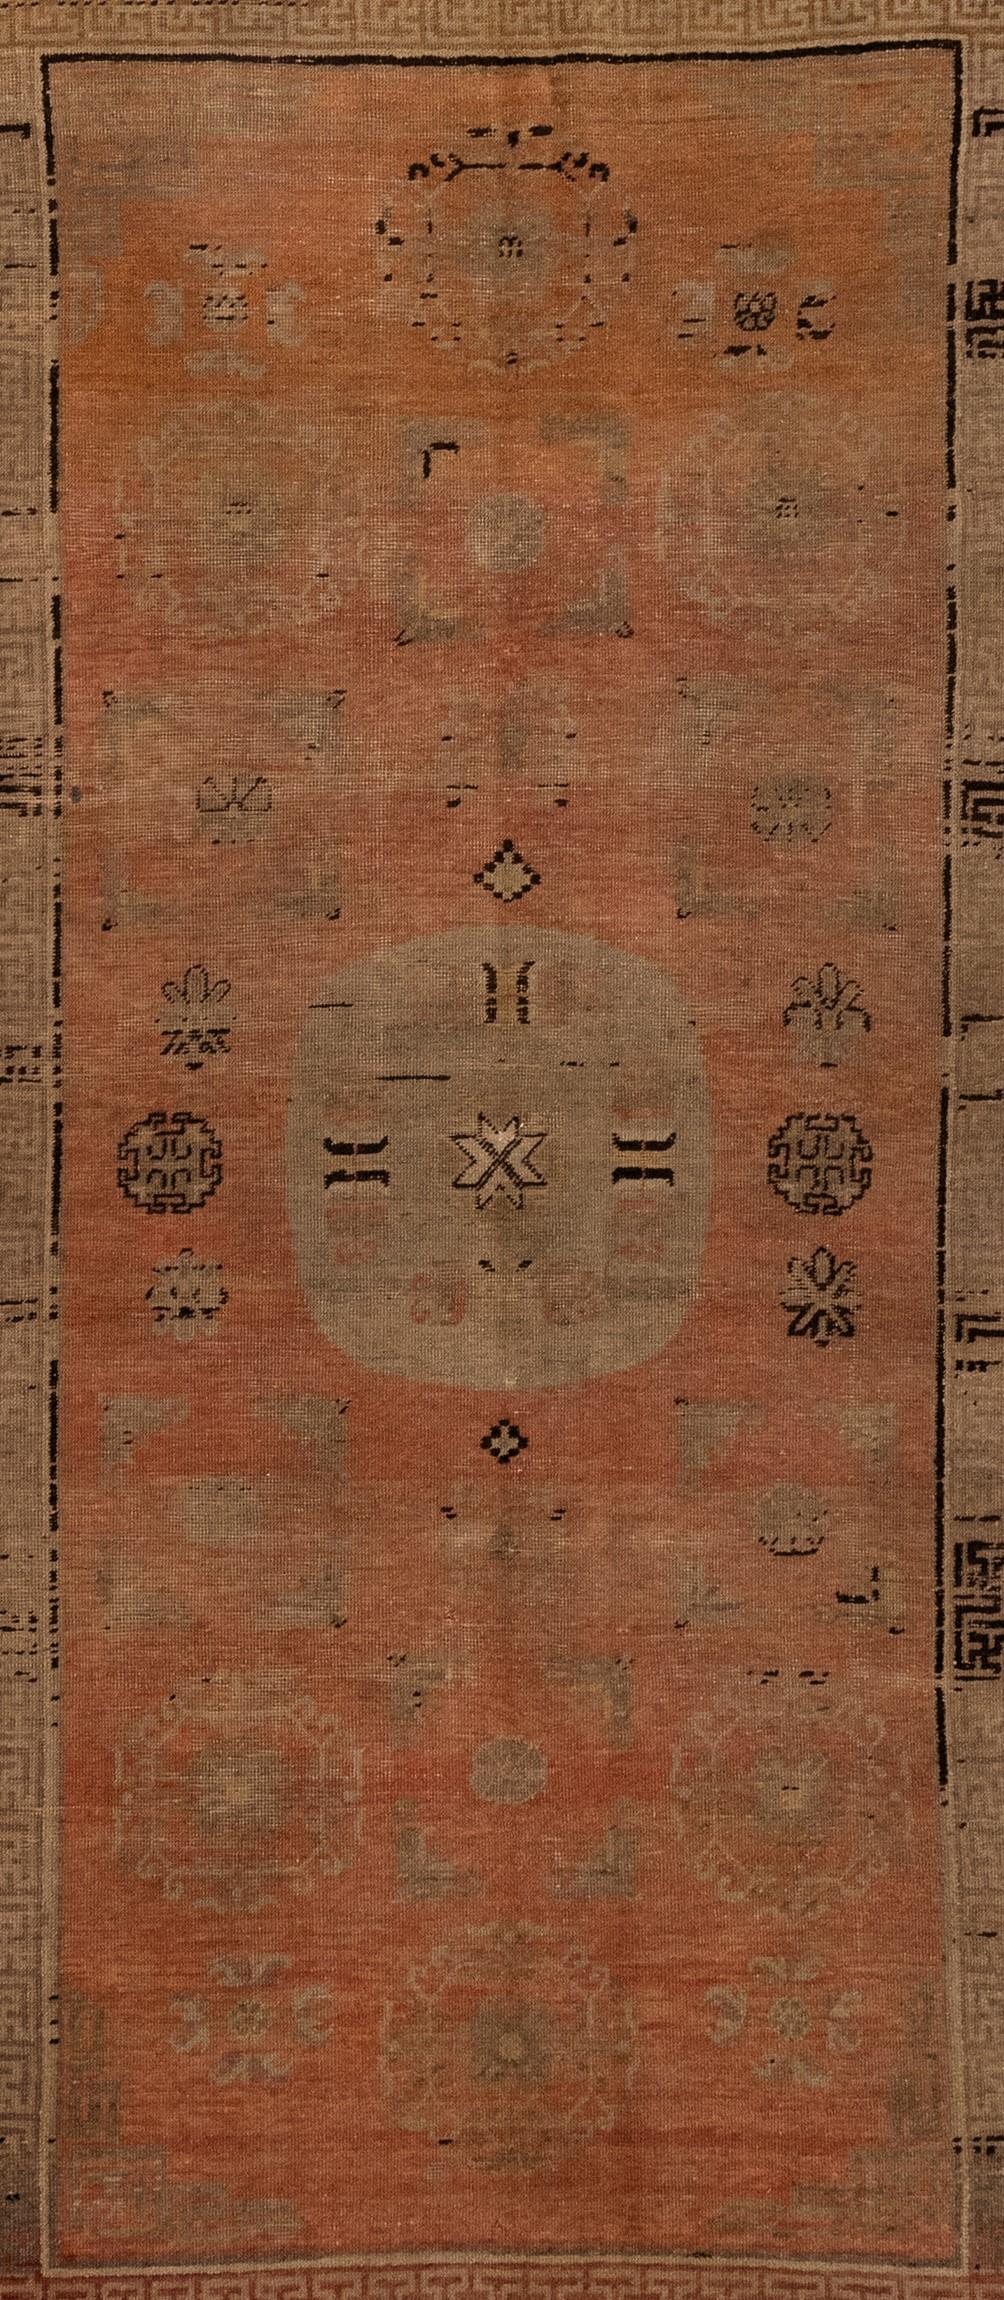 This antique Khotan rug from East Turkistan is truly stunning. It's clear that a lot of care and attention went into its creation around 1900, and the circular medallion is the real highlight. I love how each one features a unique design and